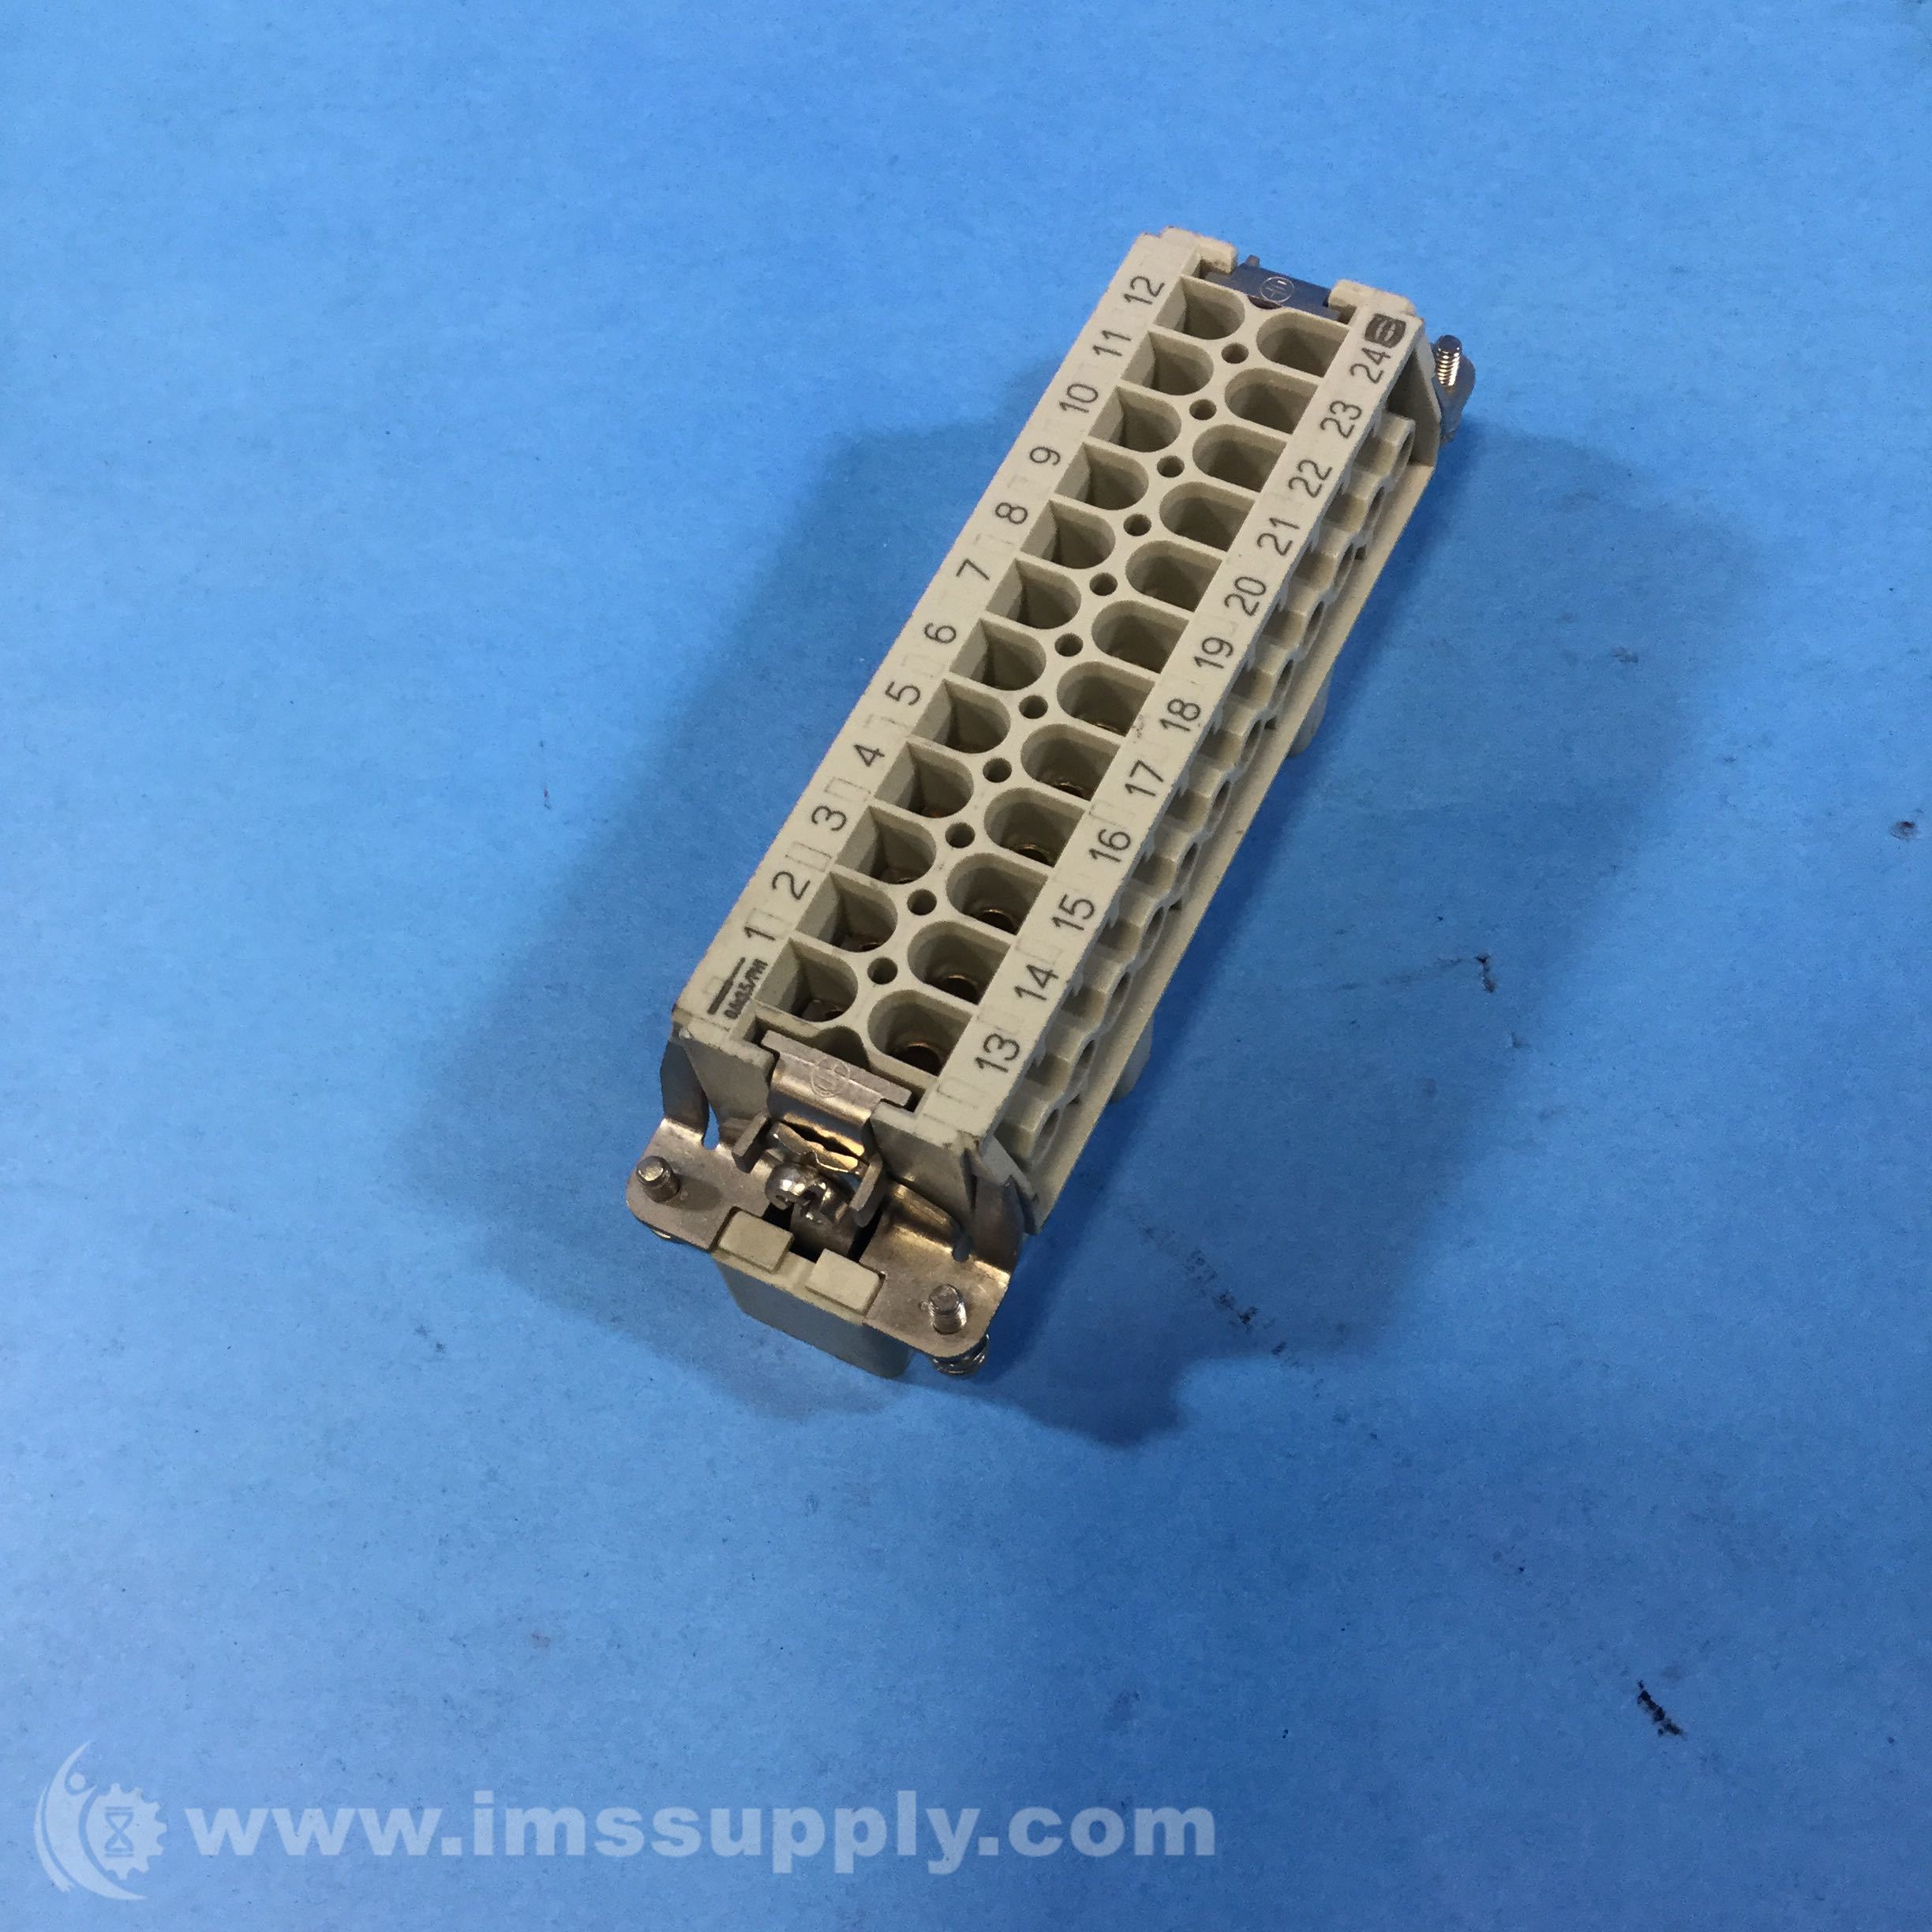 Harting HAN-24-E-M Connector 24PIN MALE 16AMP 500V 1601 